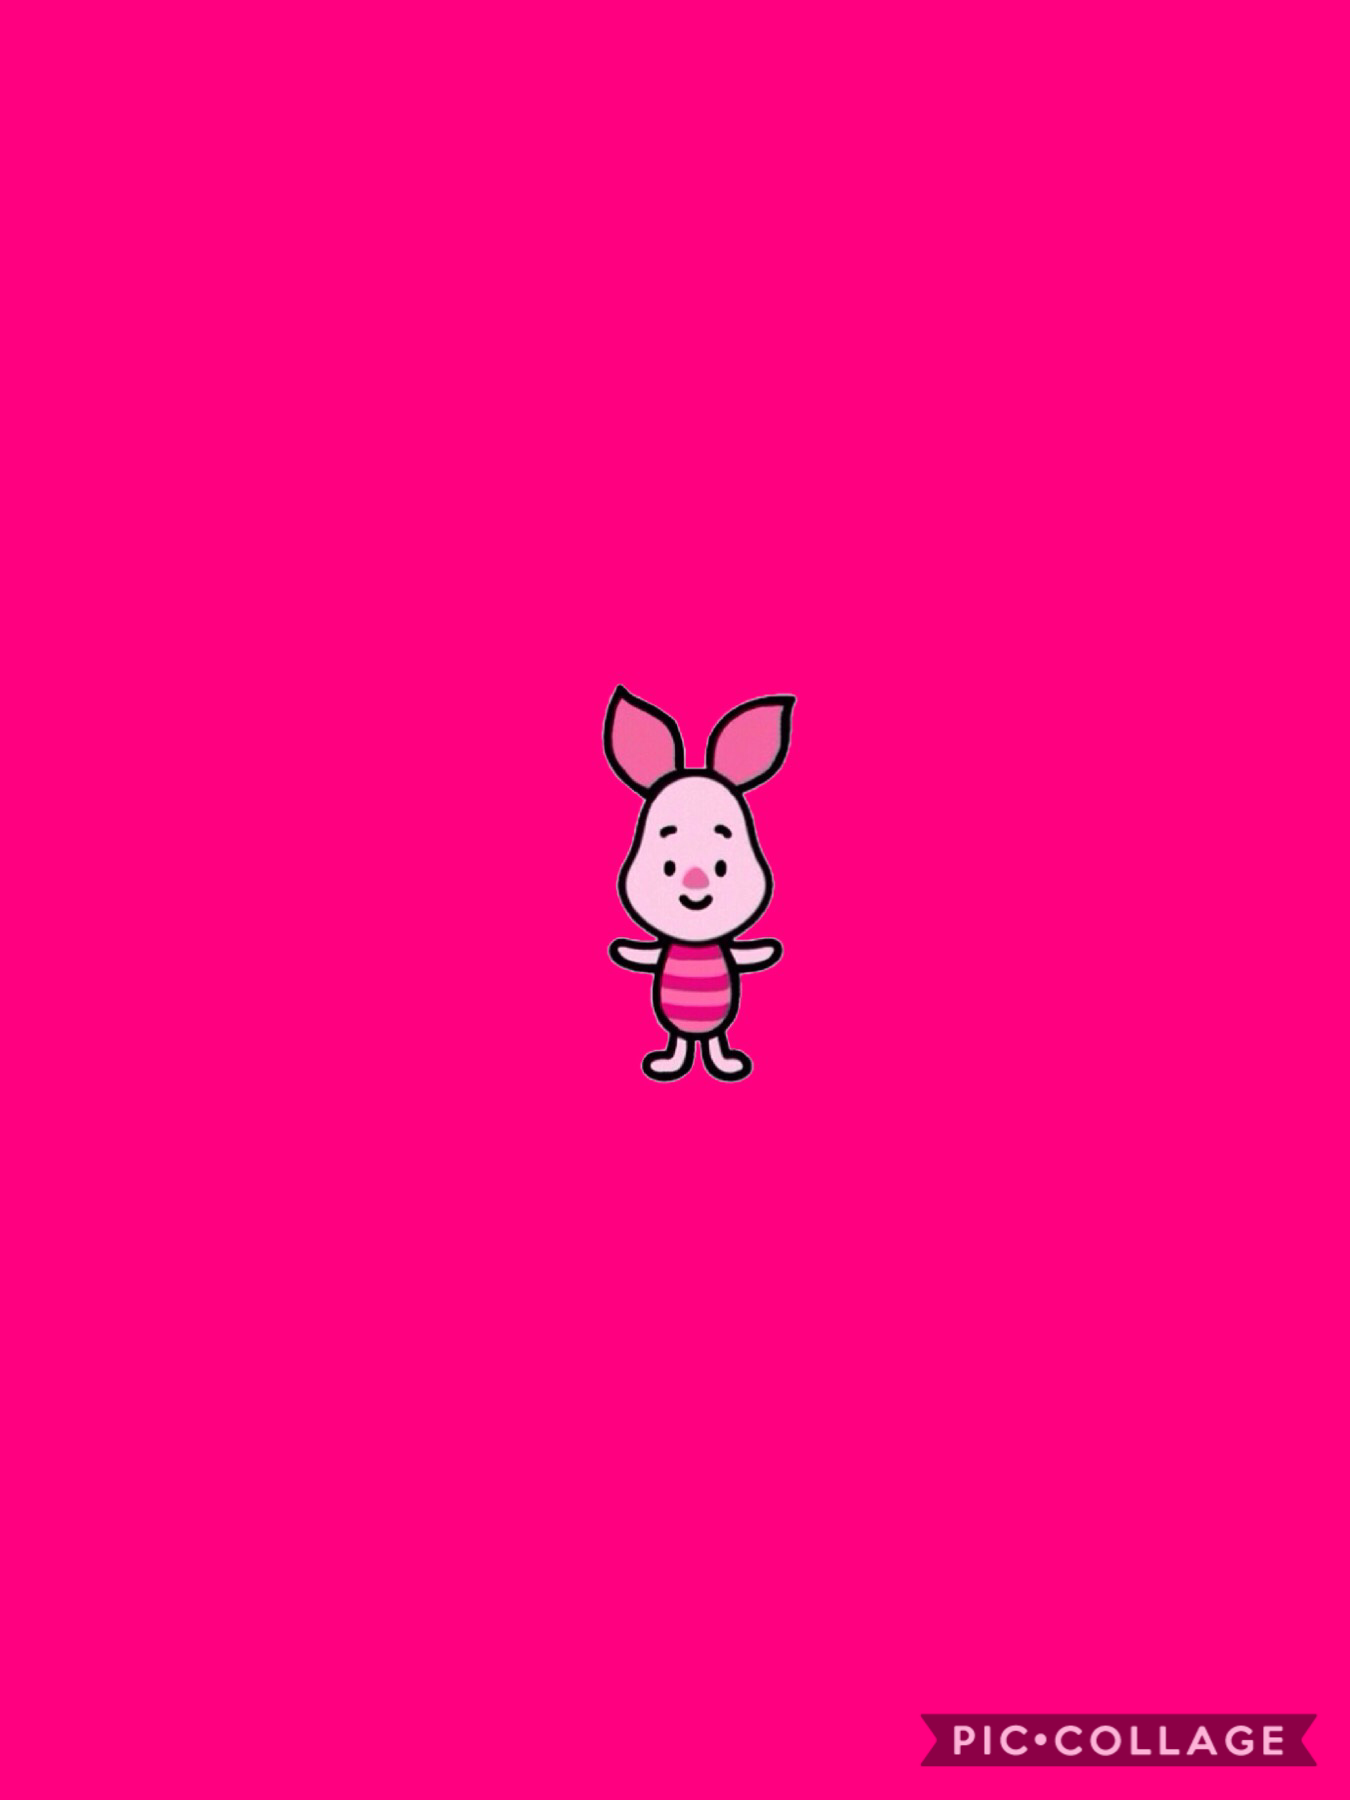 Piglet the pinky 